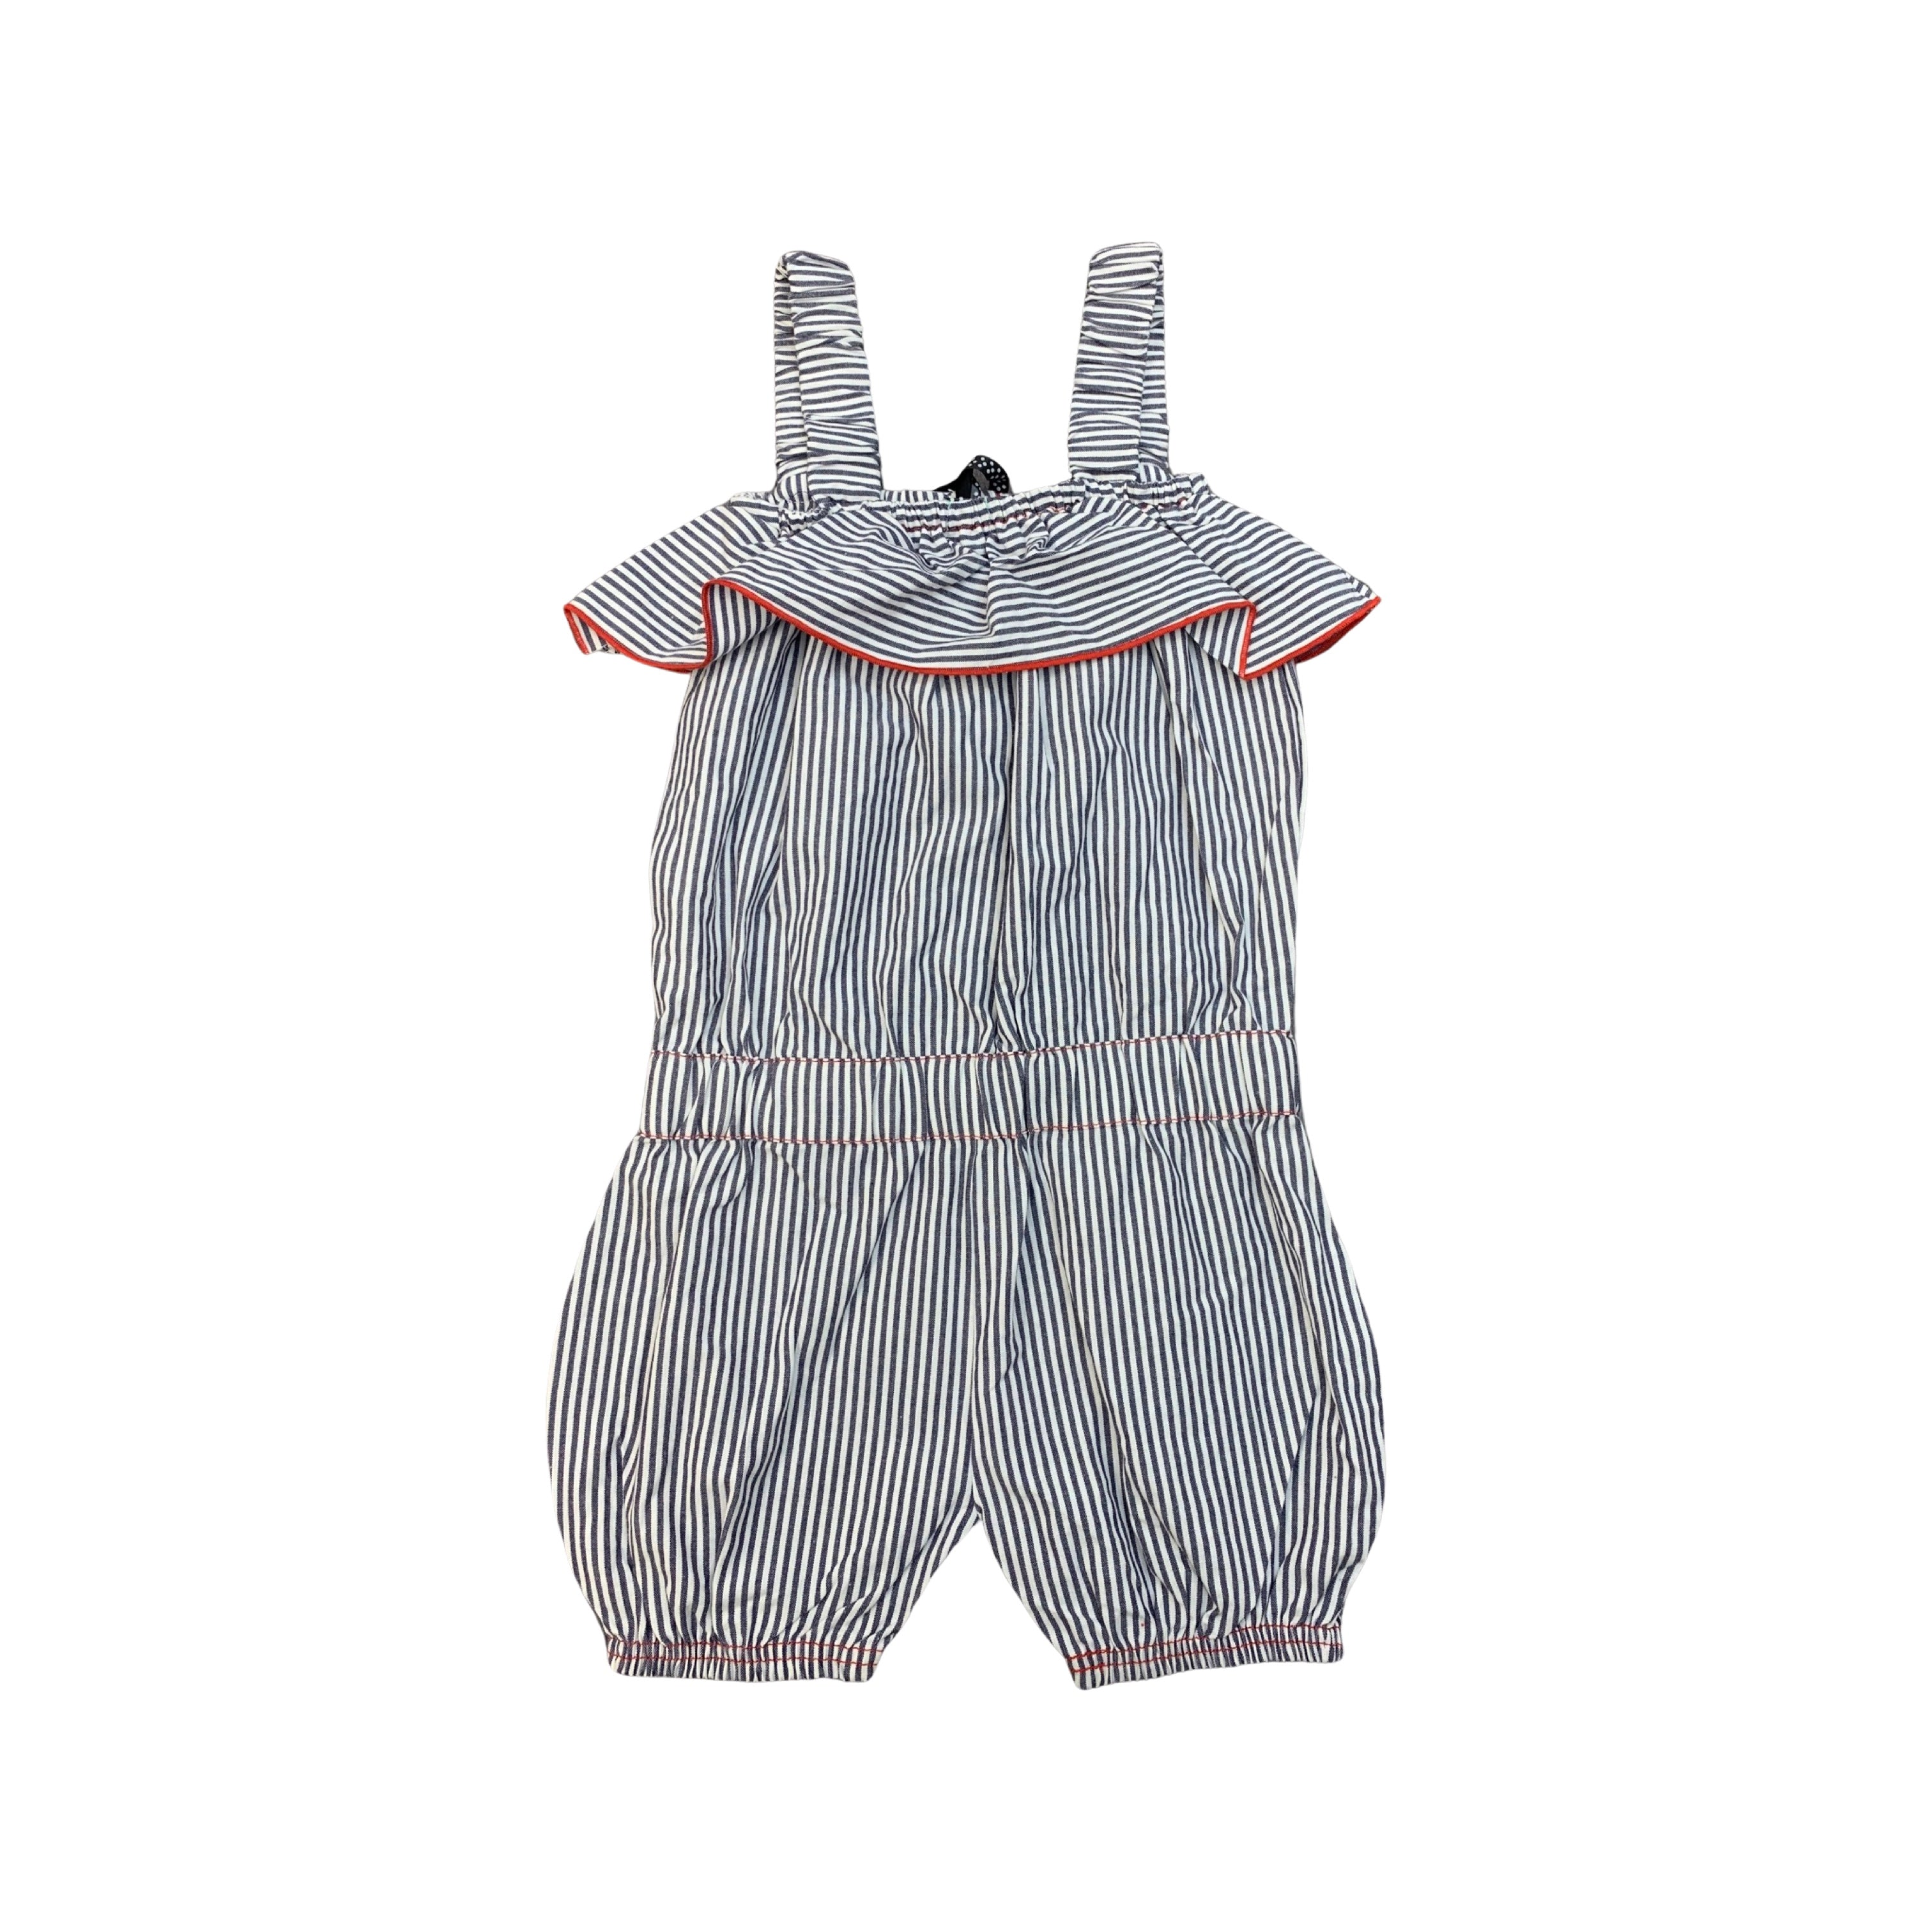 Lily & Sid Striped Playsuit Girls 6-7 Years BNWT